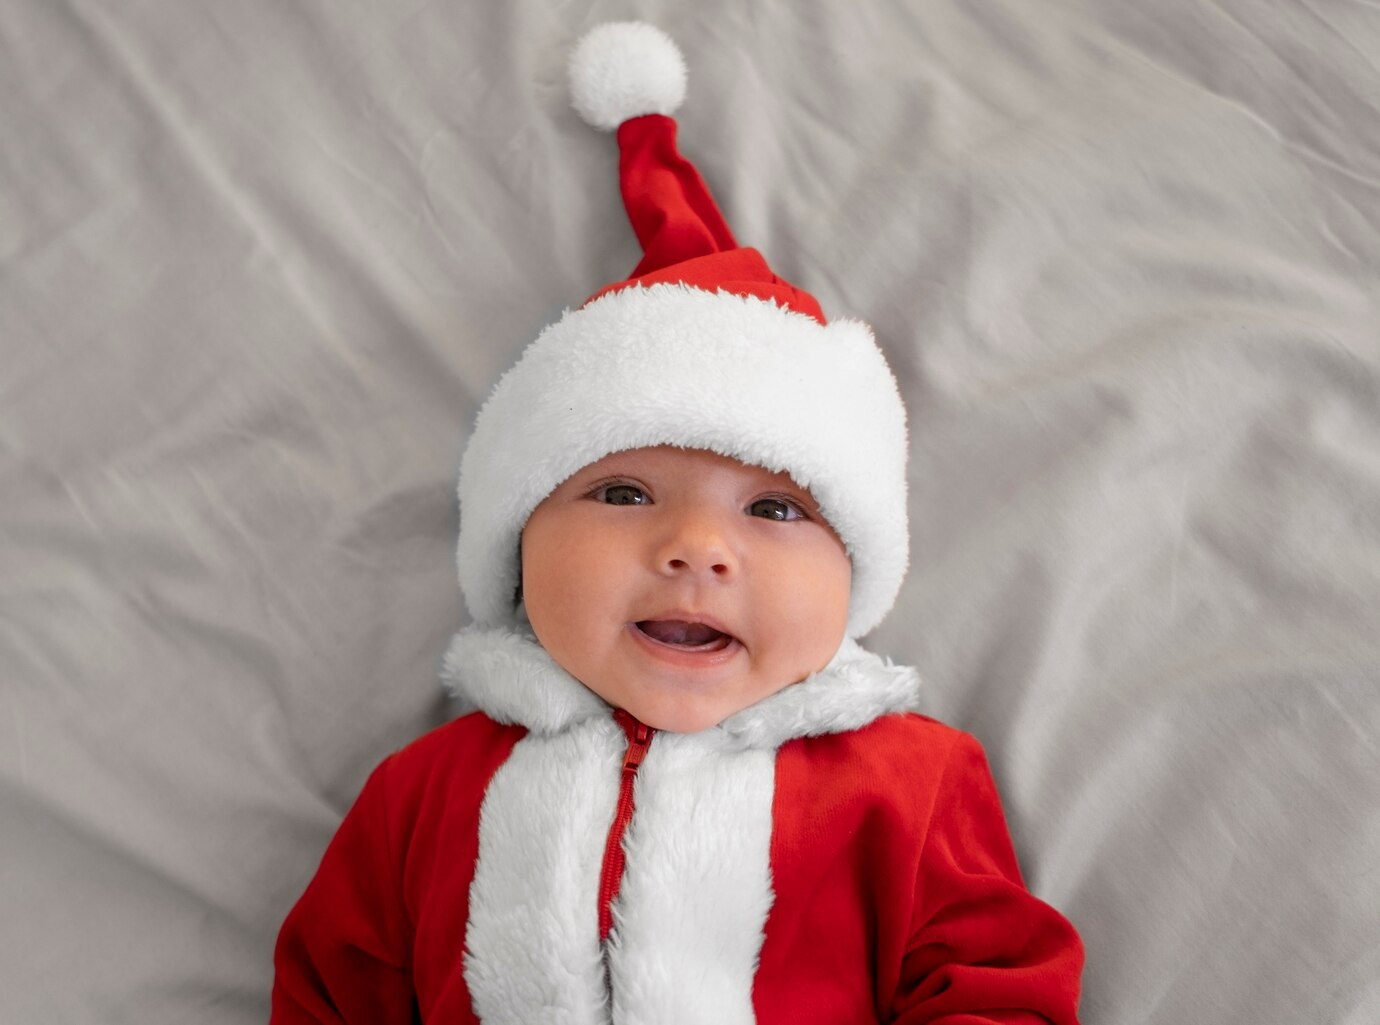 A baby dressed in Santa Claus clothing.